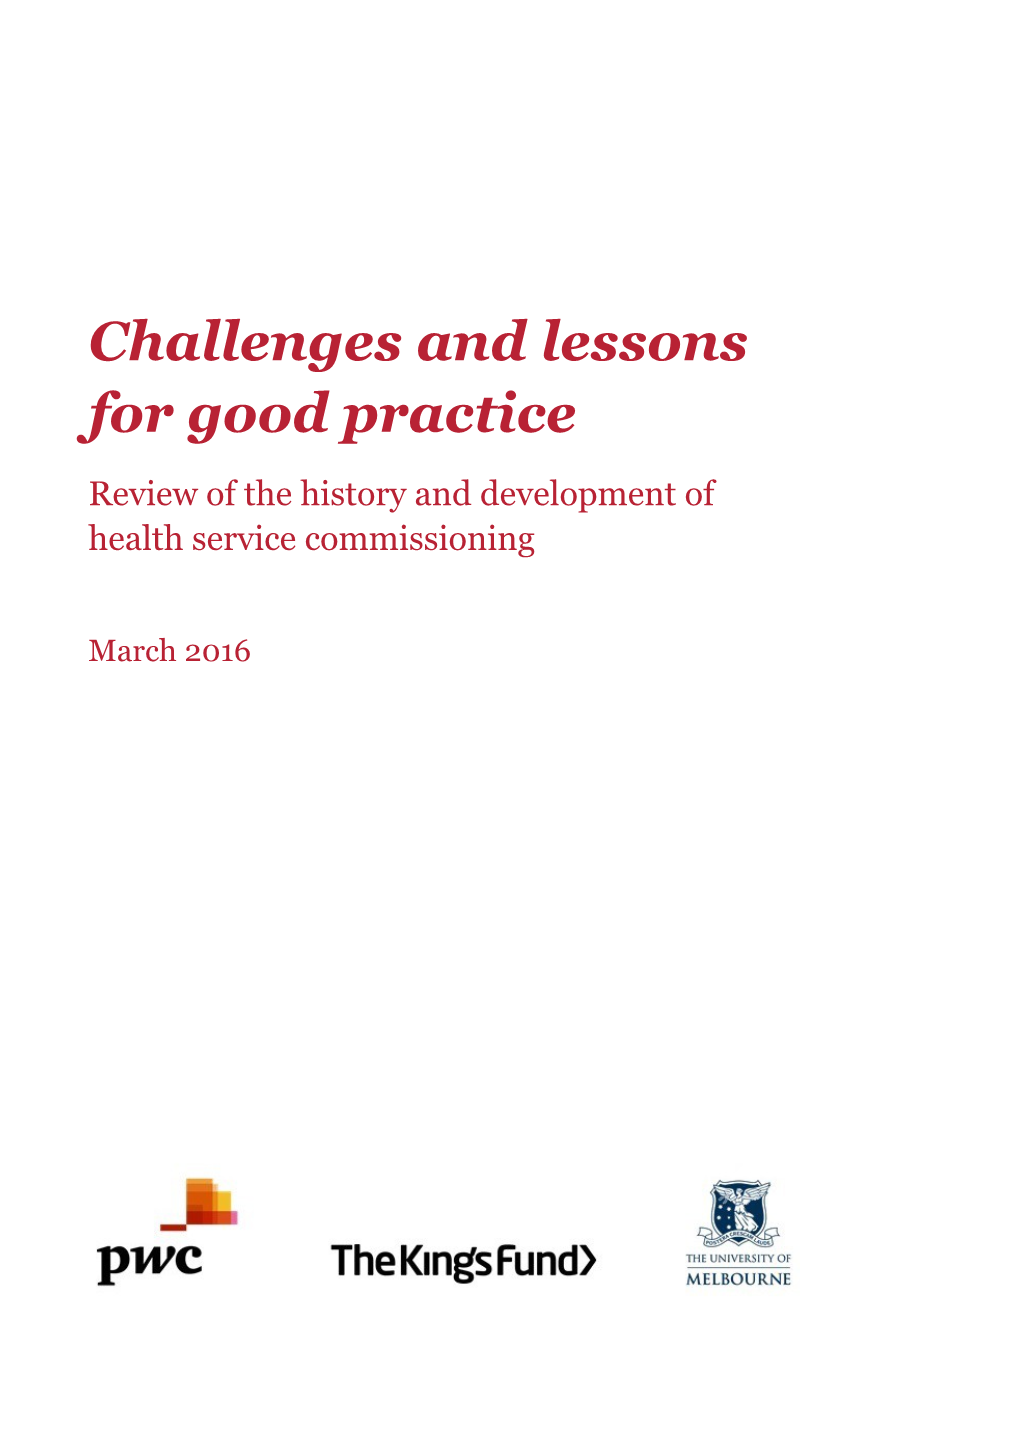 Challenges and Lessons for Good Practice